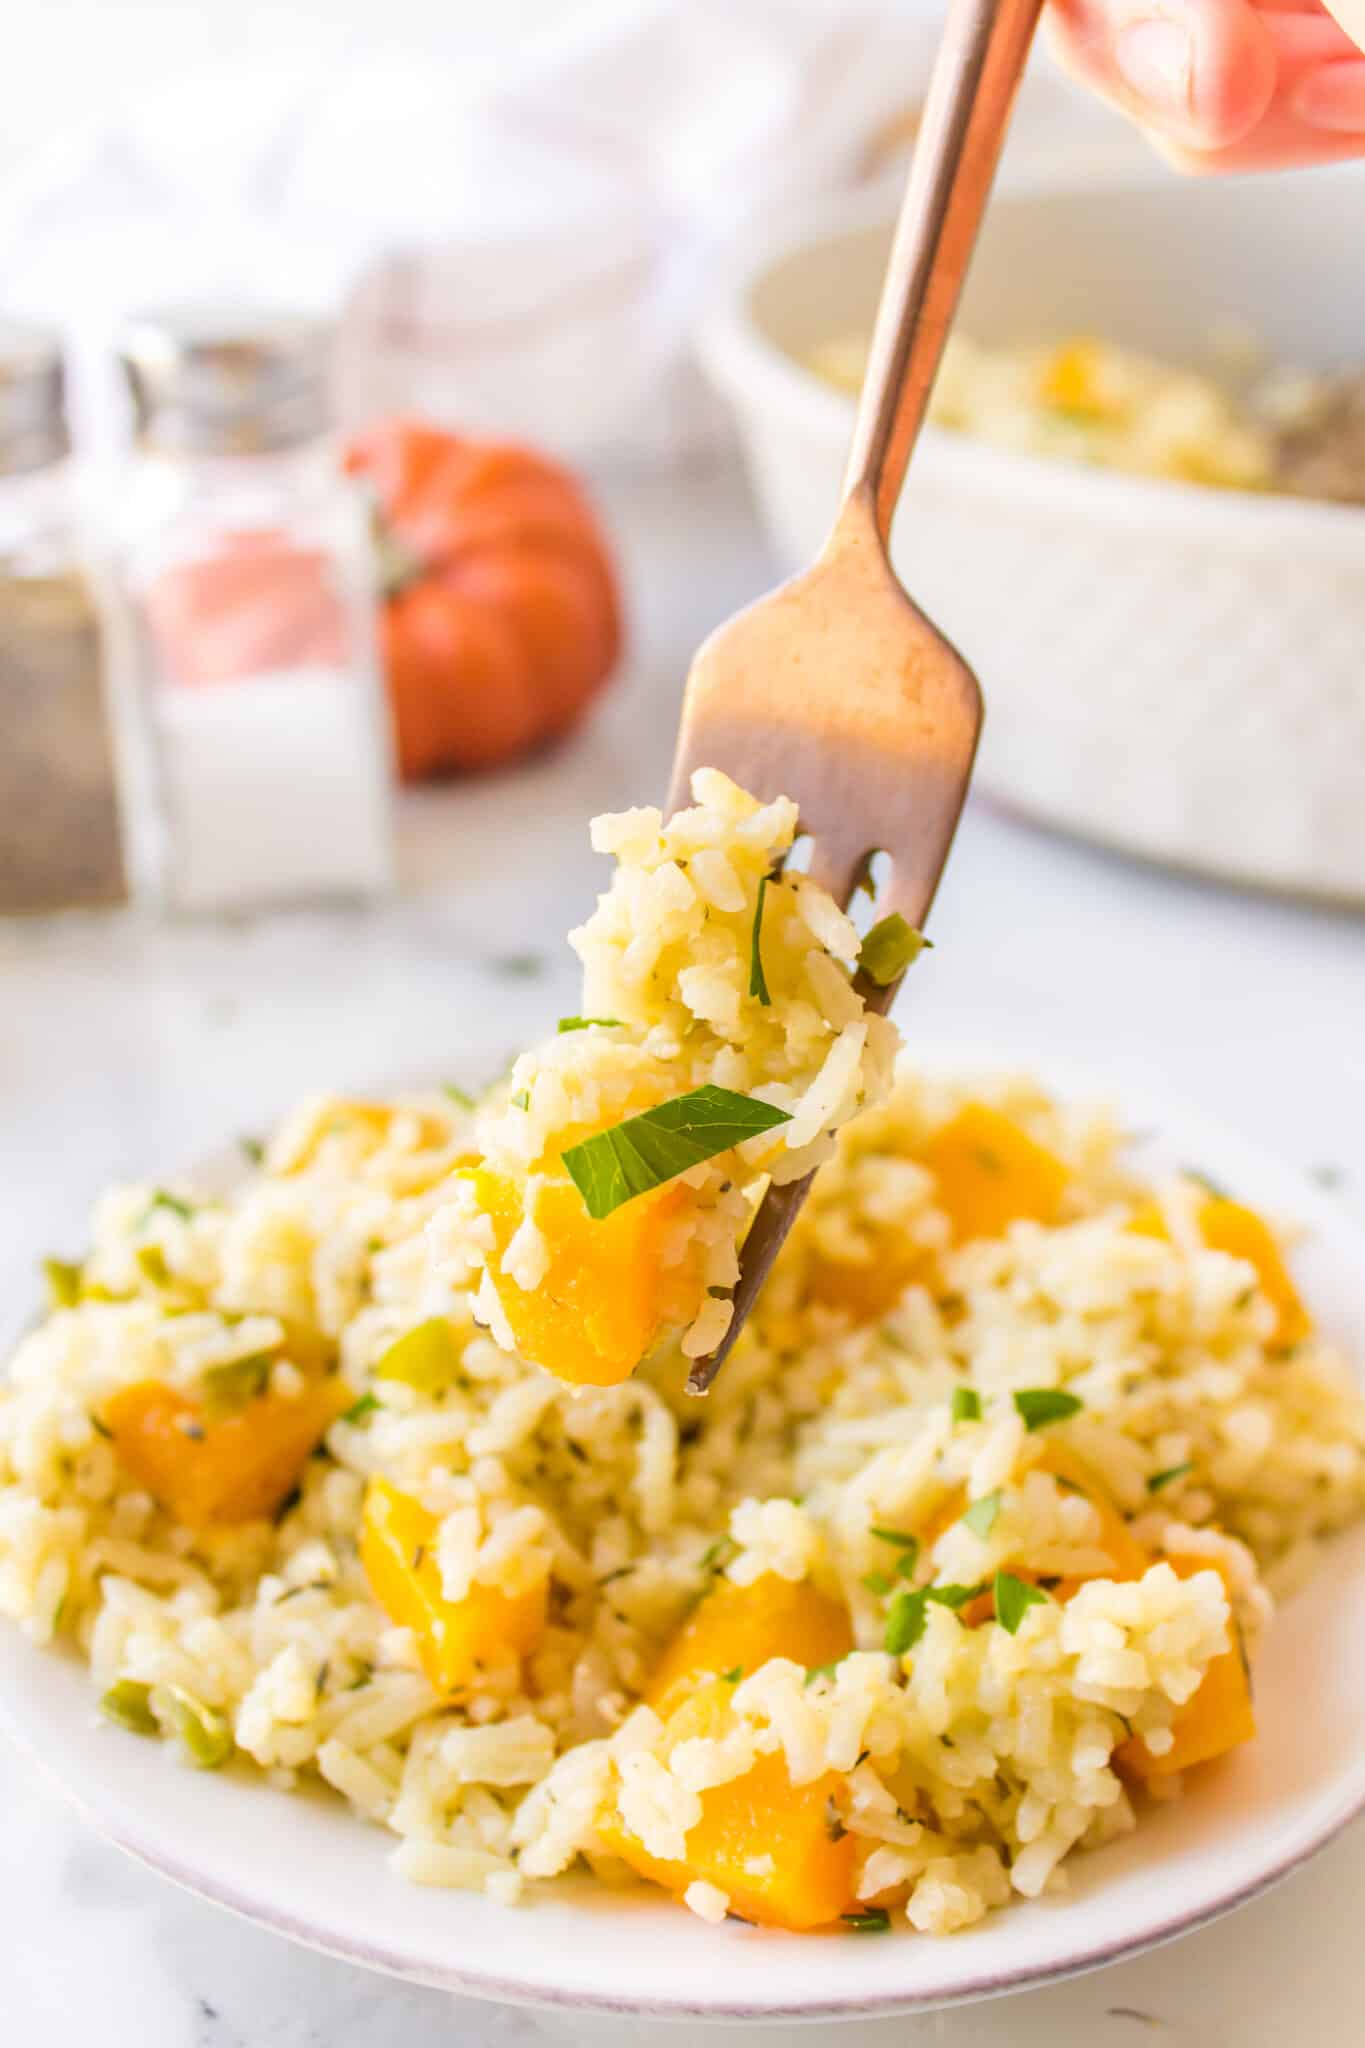 A forkful of pumpkin rice over a small serving on a plate.